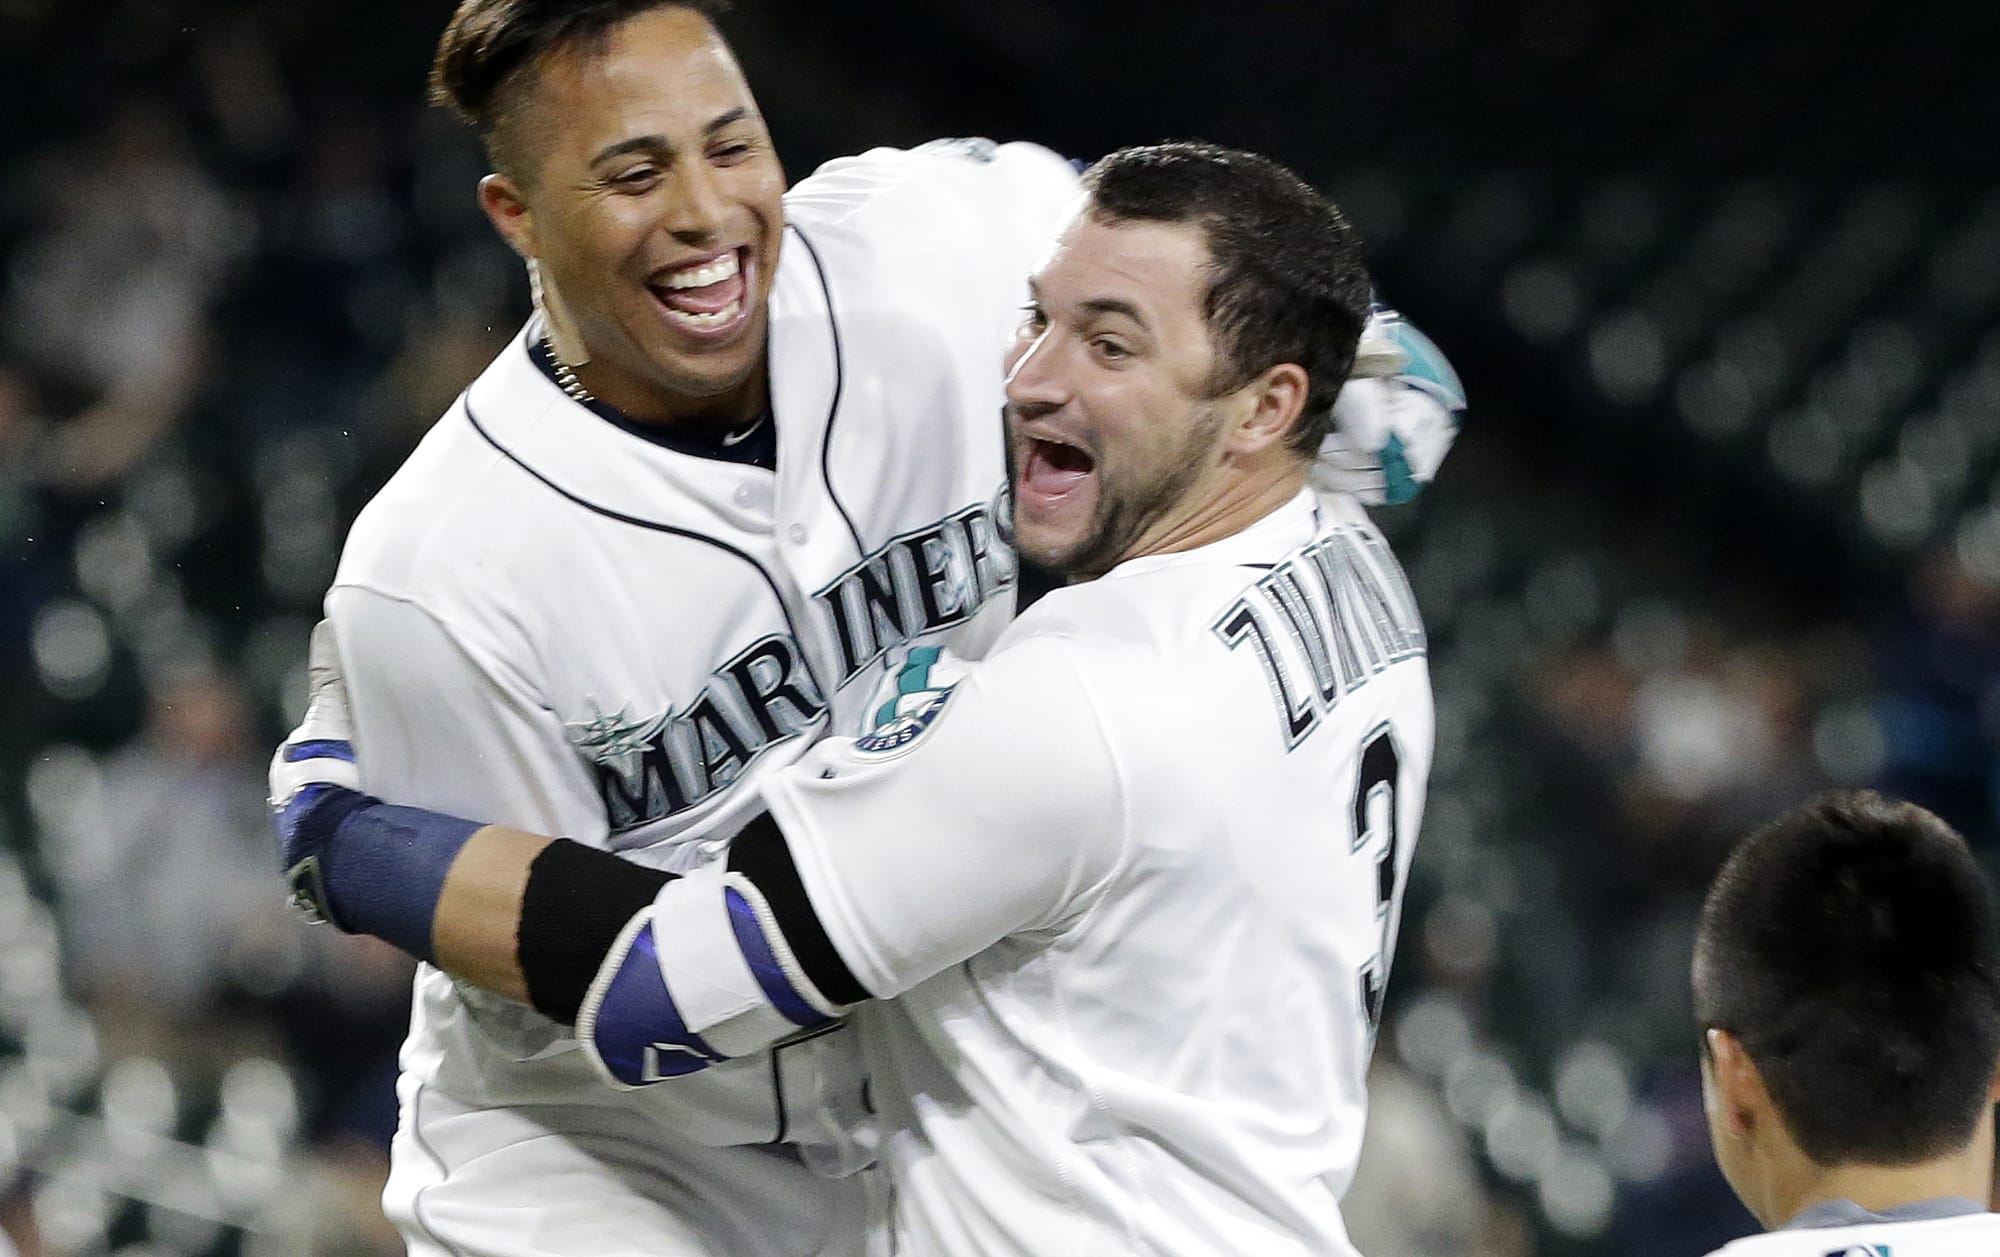 Seattle Mariners' Mike Zunino, right, is embraced by Leonys Martin after Zunino's sacrifice fly that gave the team a victory over the Detroit Tigers in the 15th inning of a baseball game Wednesday, Aug. 10, 2016, in Seattle. The Mariners won 6-5.